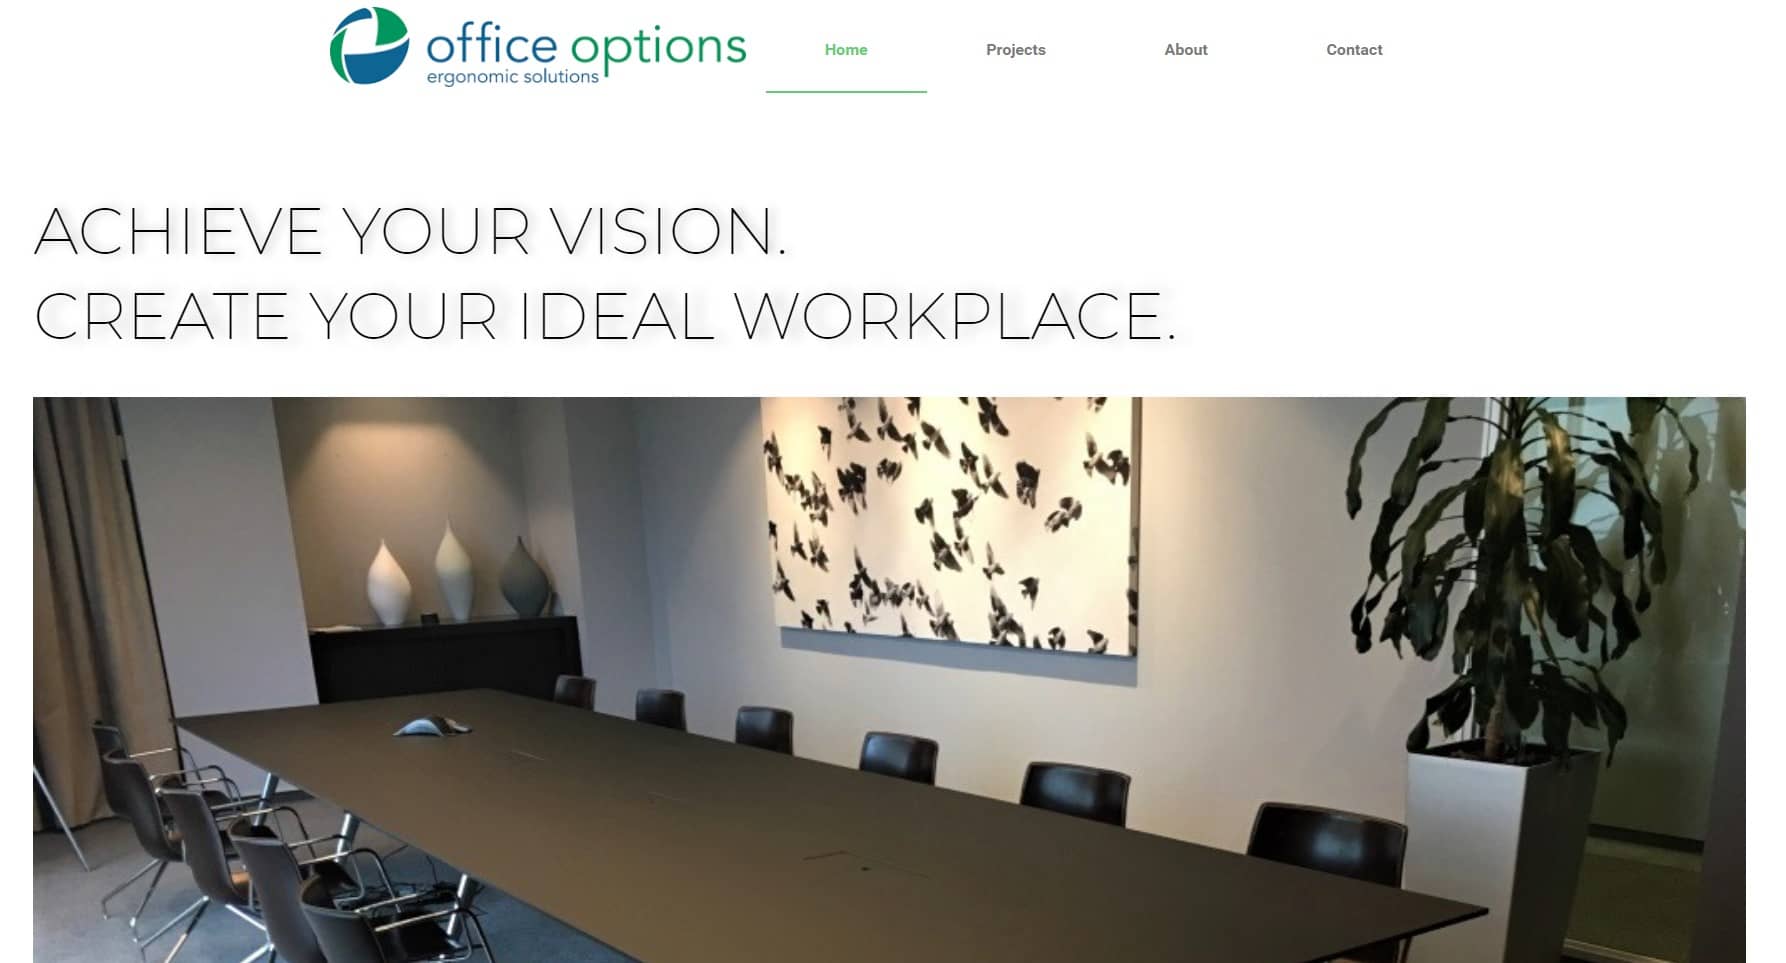 Office Options